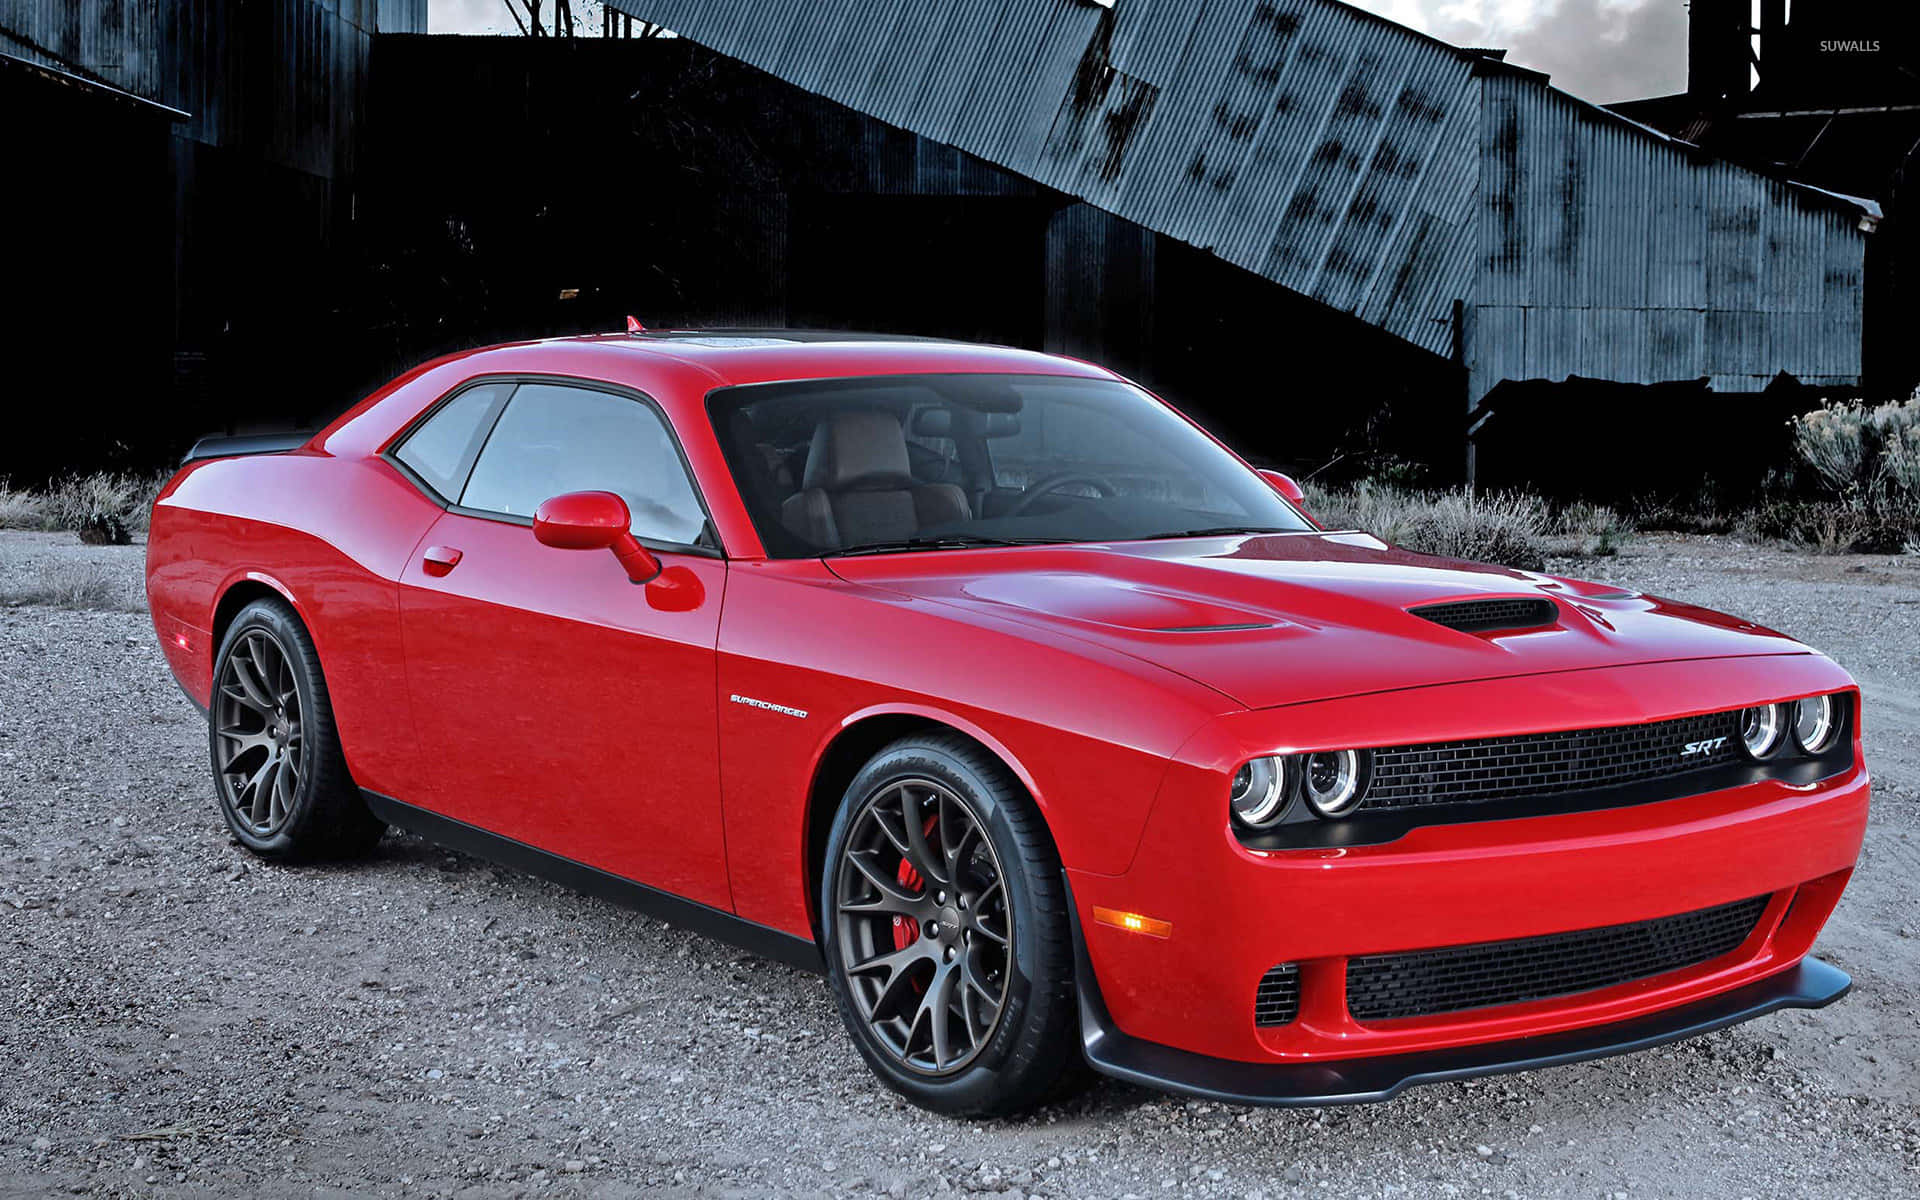 The Red Dodge Challenger Srt Parked In Front Of An Old Building Wallpaper